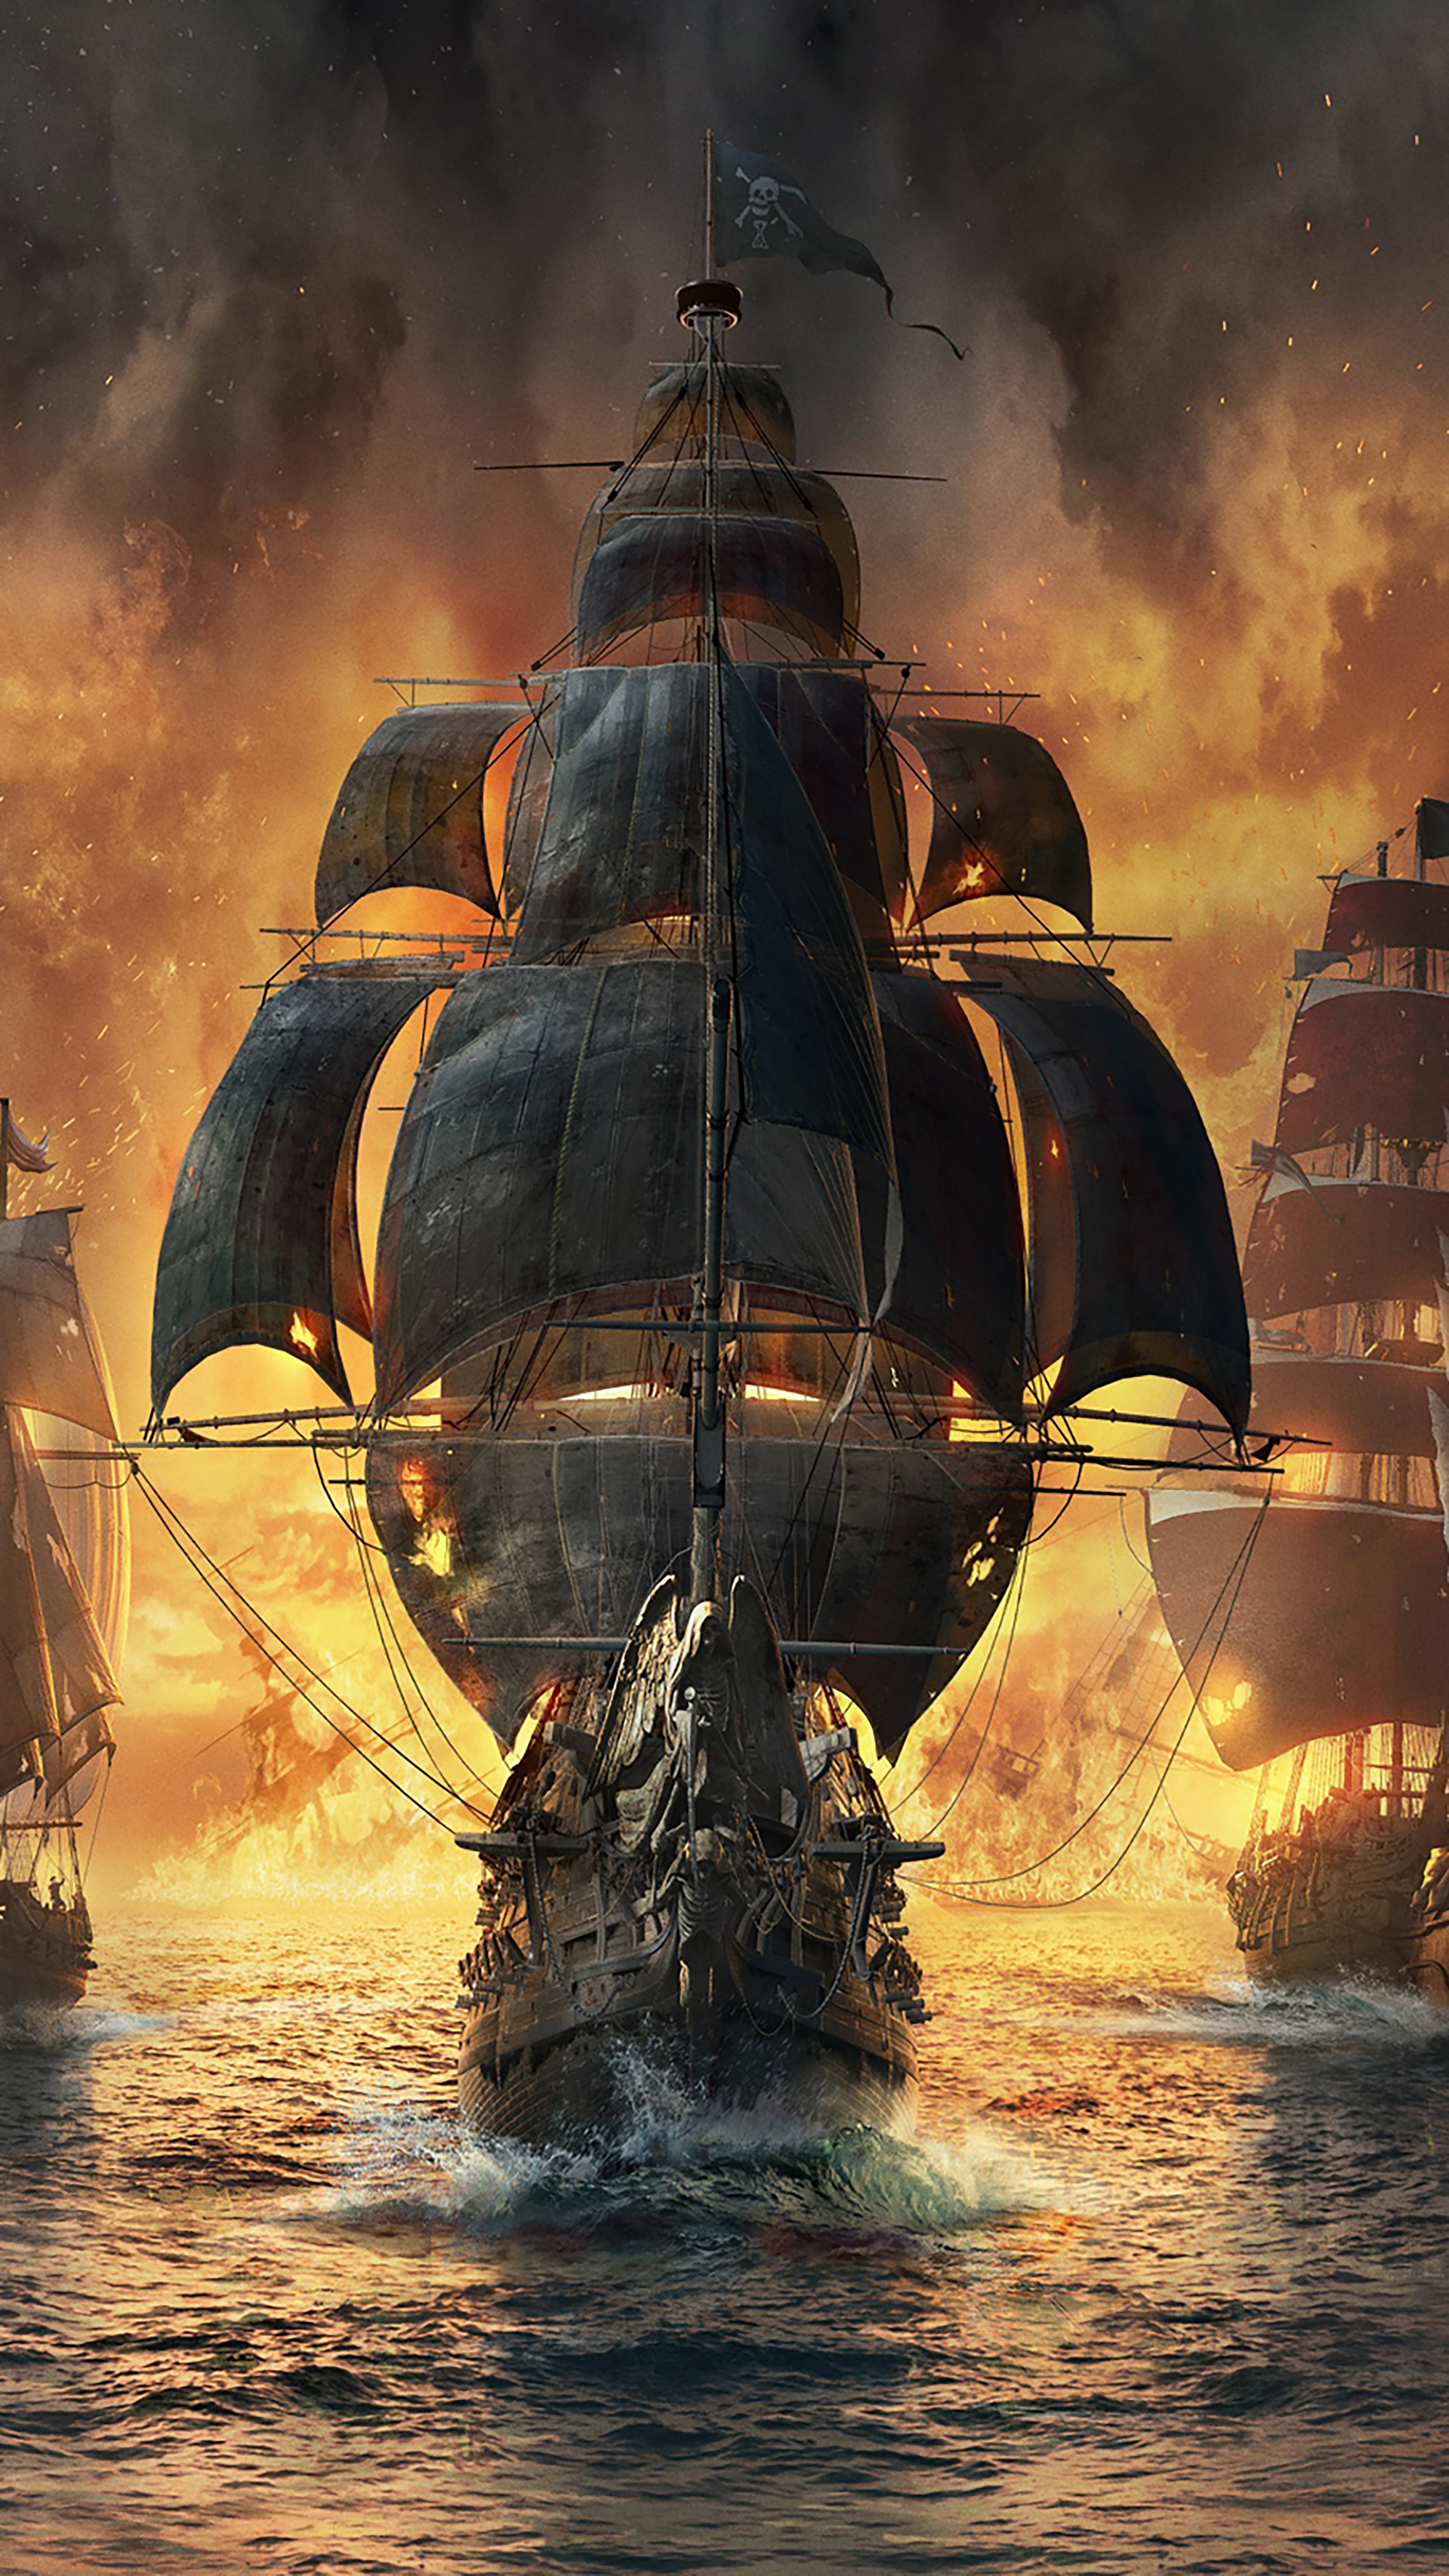 PIRATE SHIP wallpaper by Dhanaaa  Download on ZEDGE  af0f